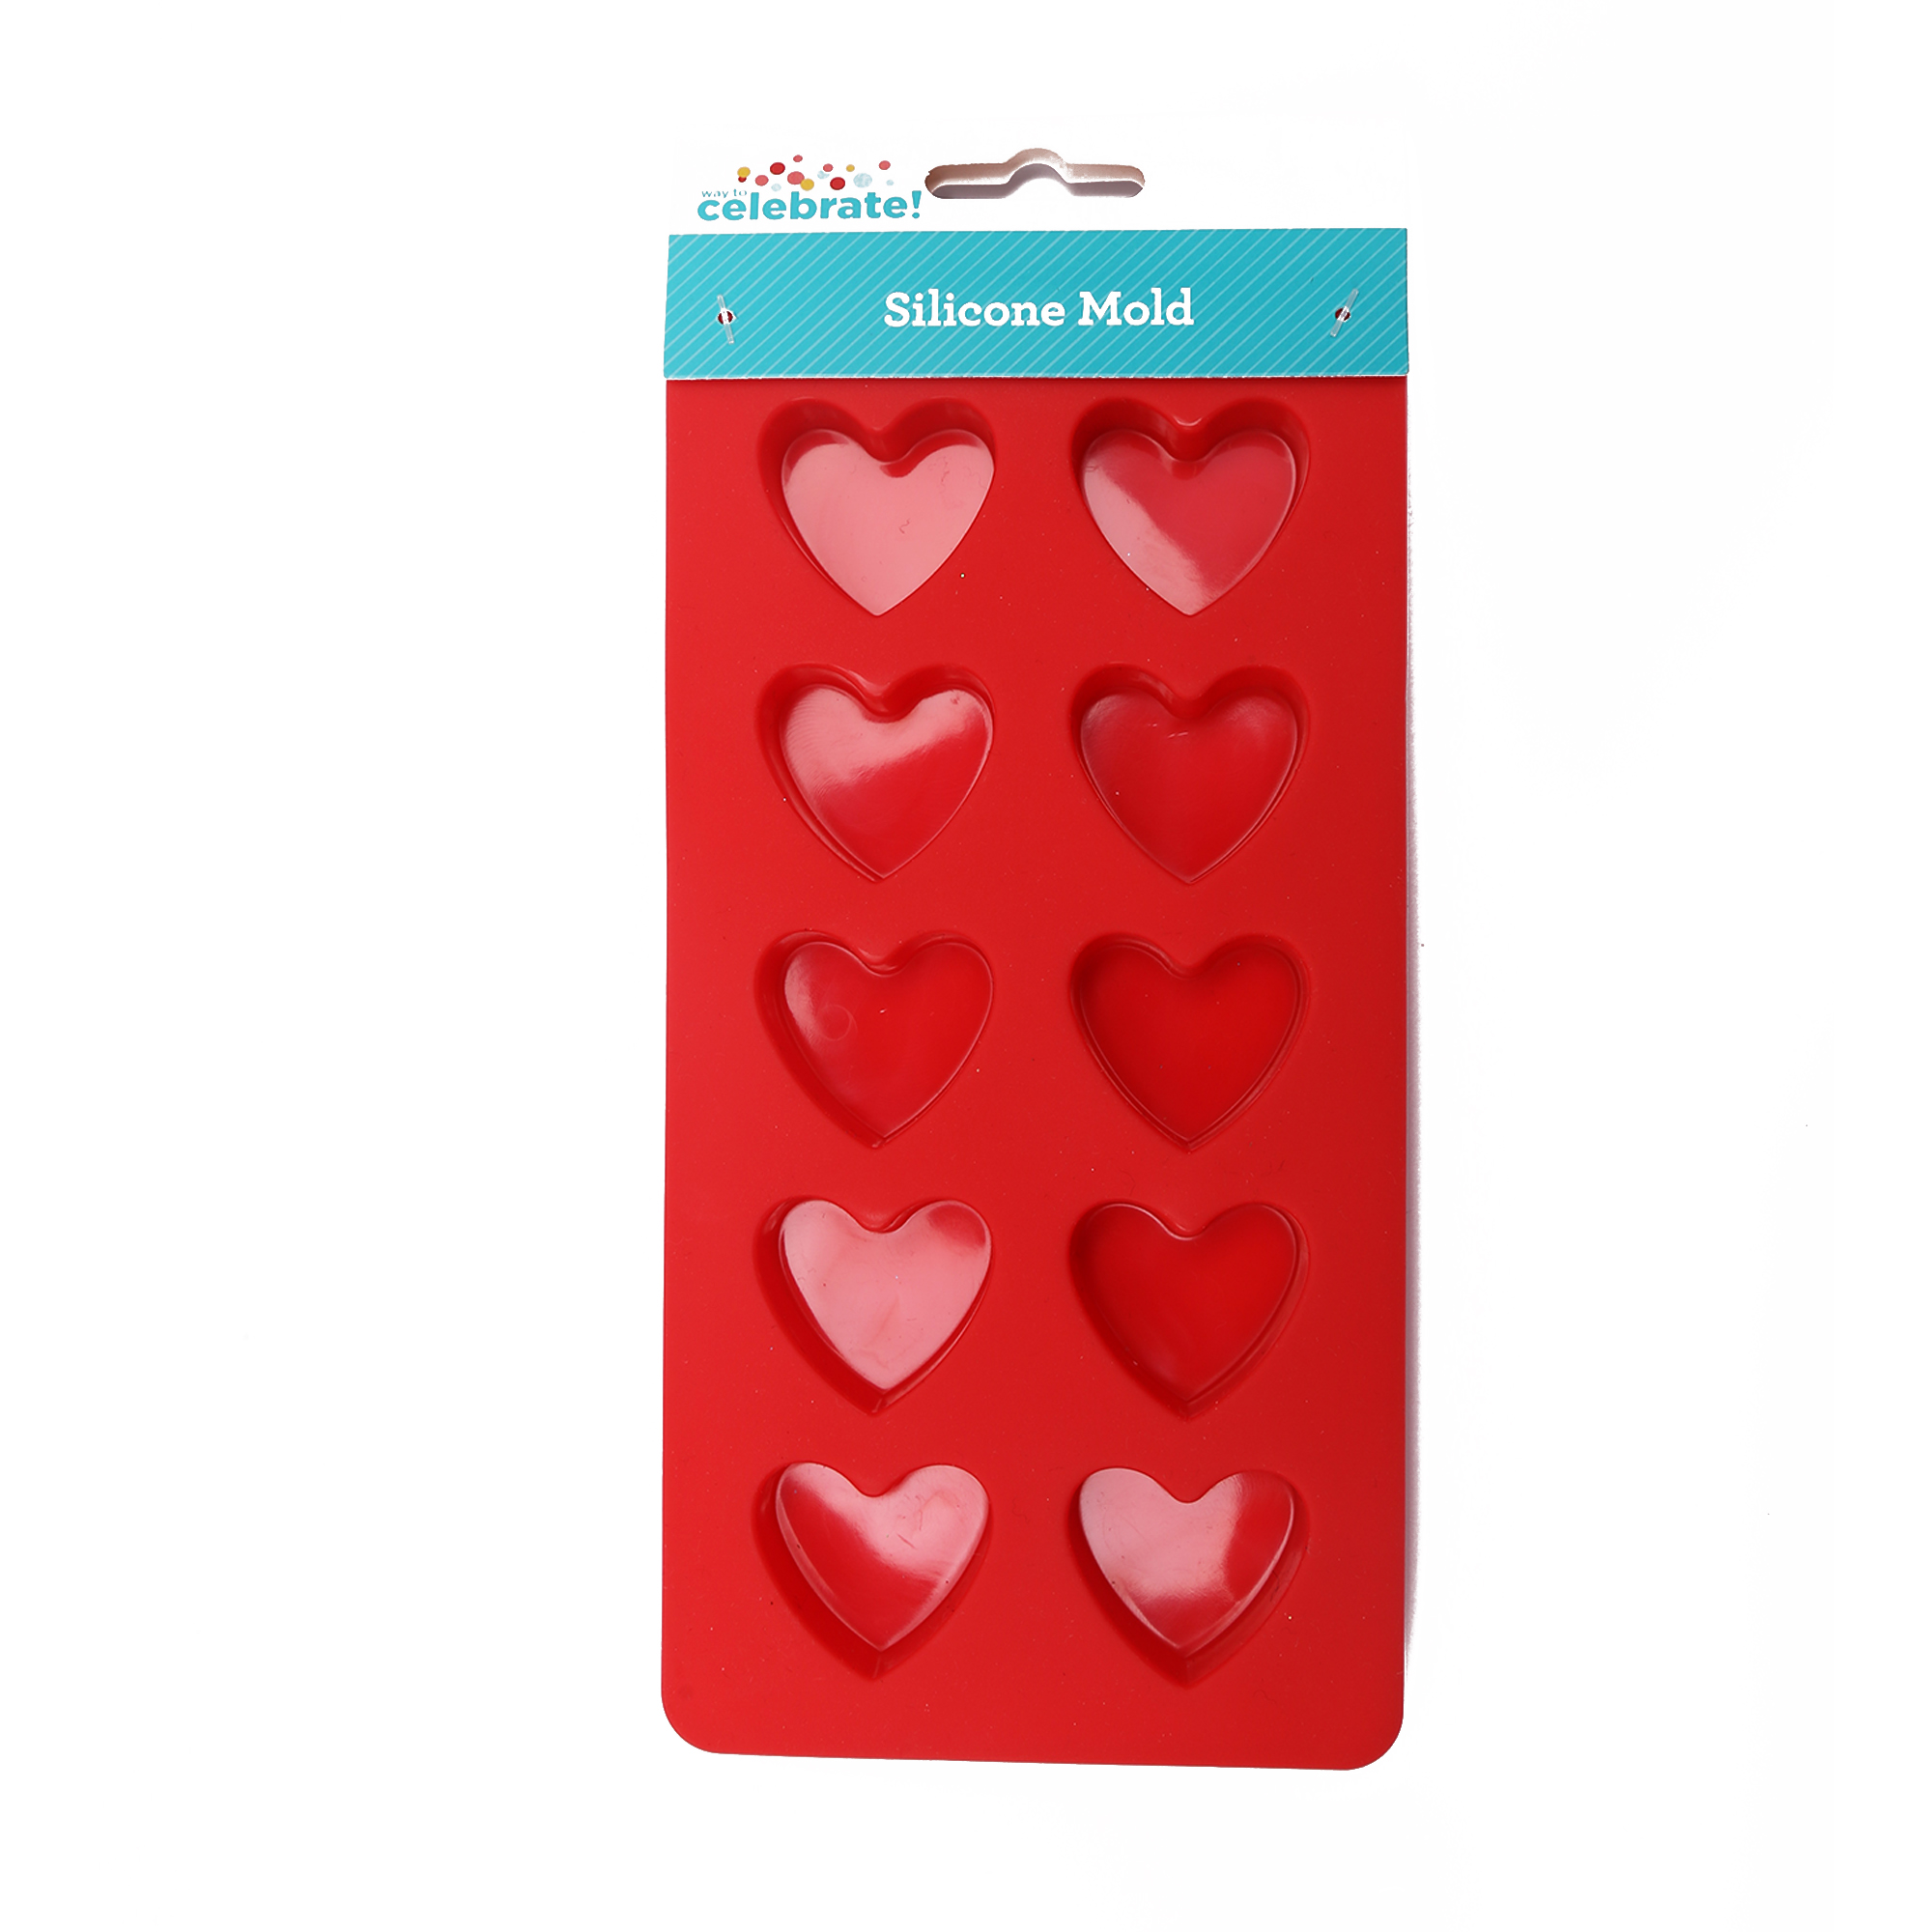 Way to Celebrate! Non-Stick Heart Silicone Baking Mold - Red - 1 Each